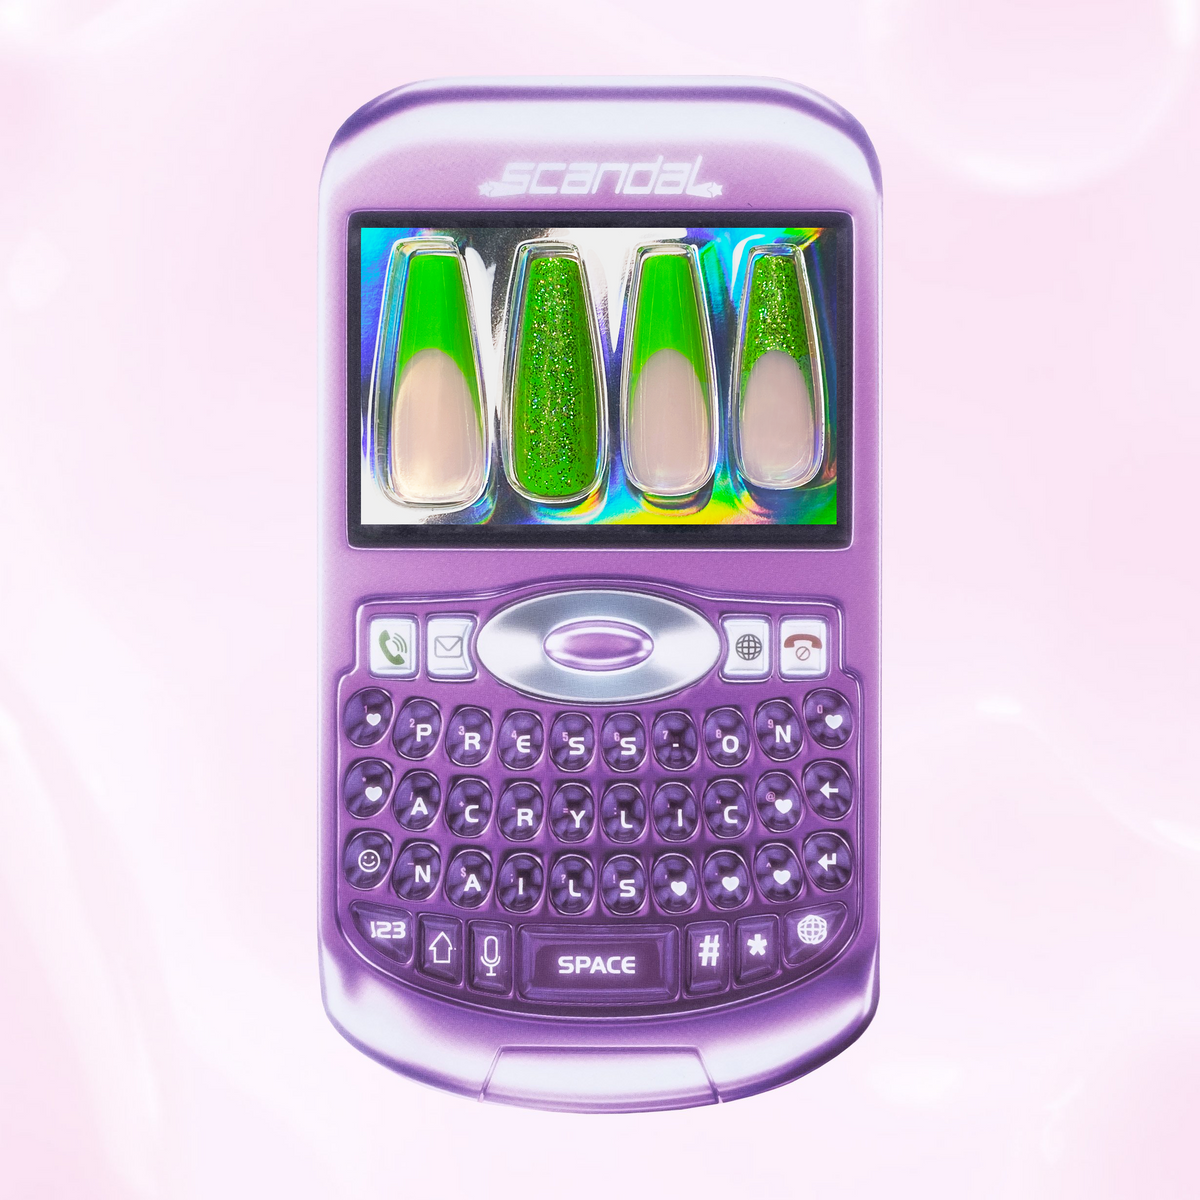 Lime green french tips with full glitter accent nails. Press-on nails displayed inside 2000's Y2K era inspired pink cellphone box packaging. In front of a pink background.